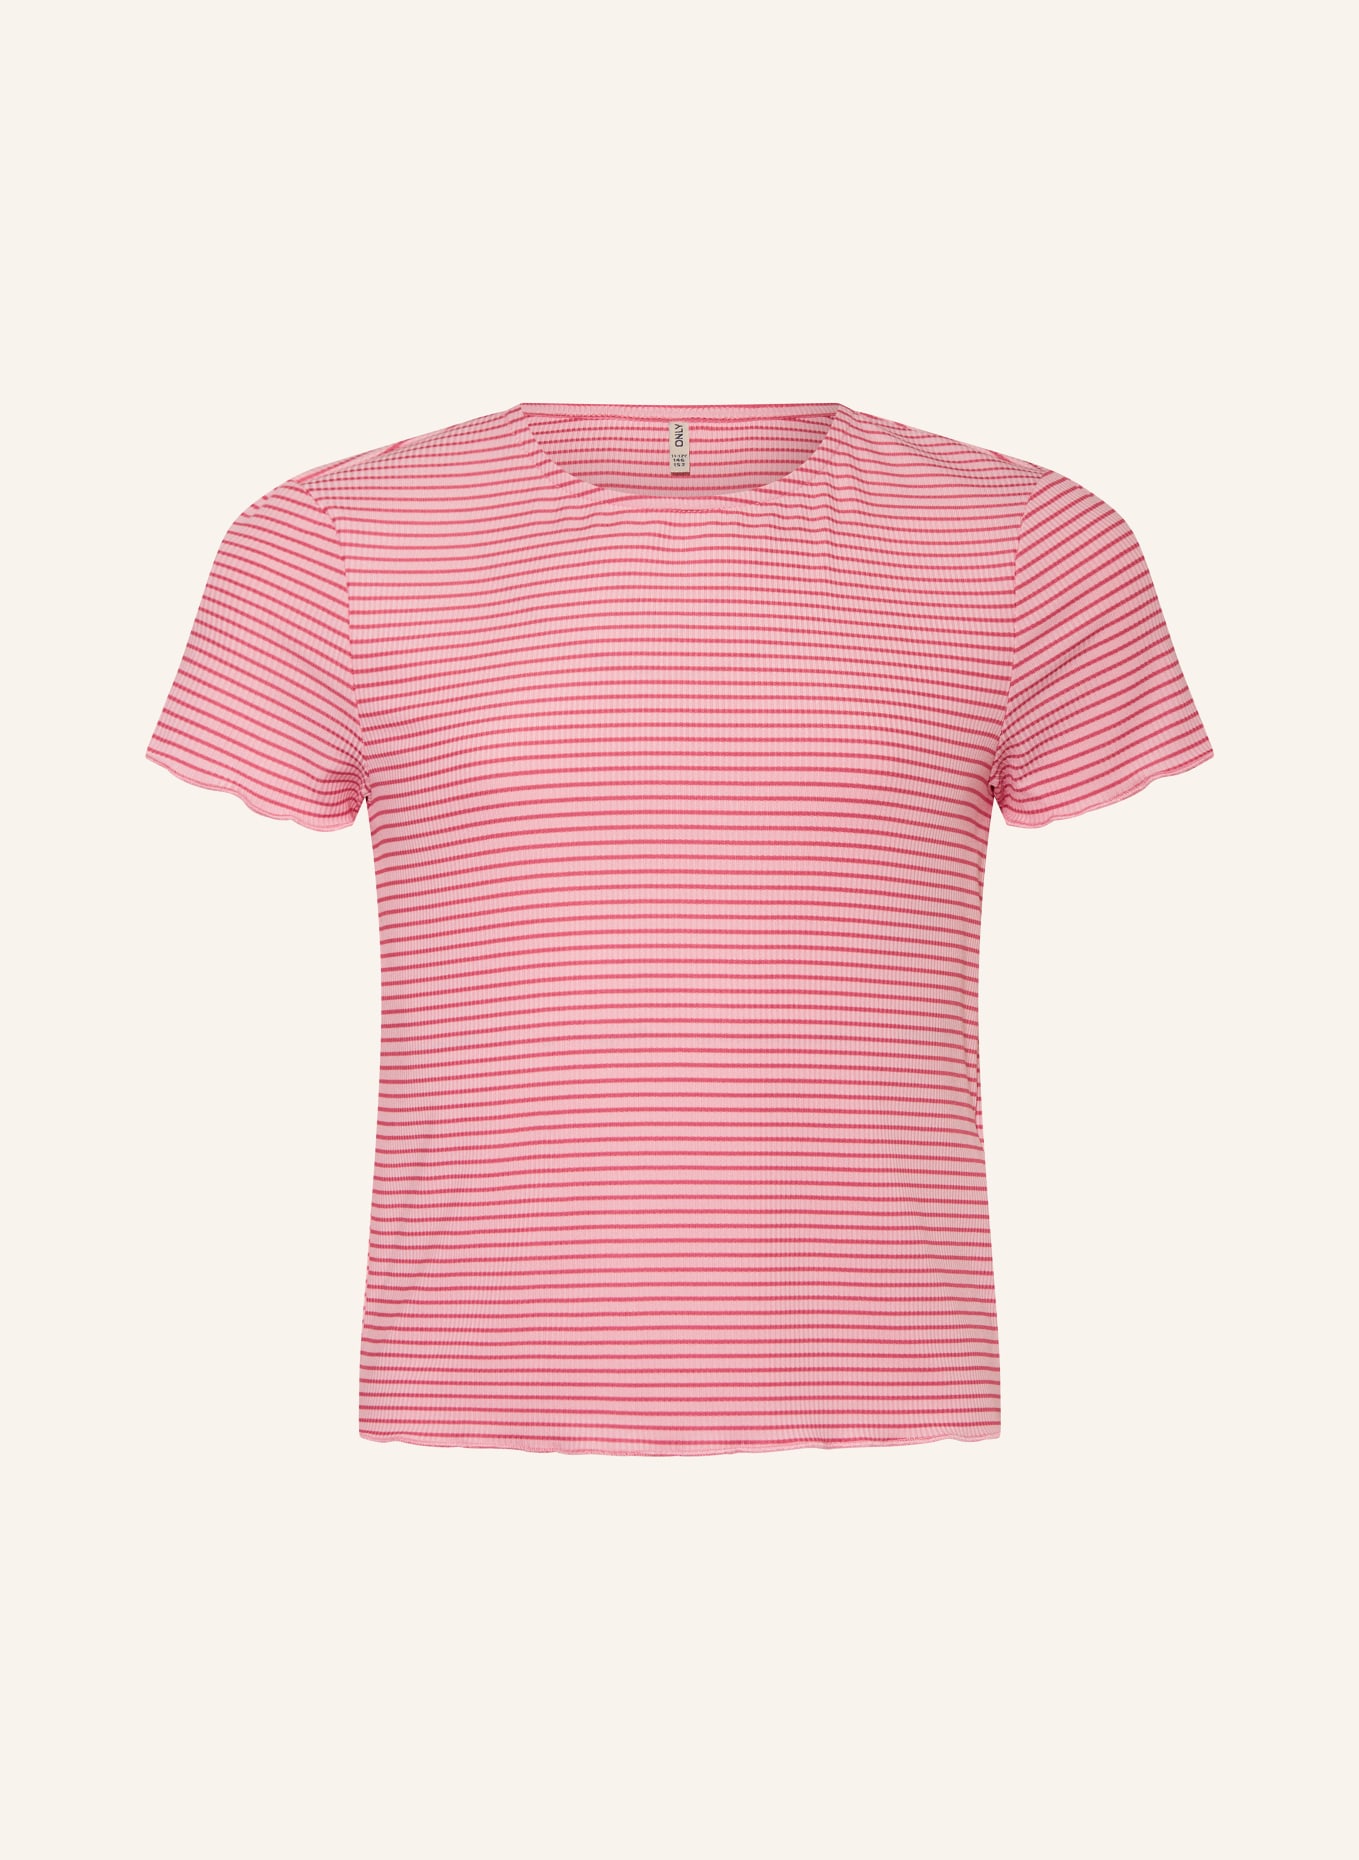 ONLY T-Shirt, Farbe: PINK/ ROSA (Bild 1)